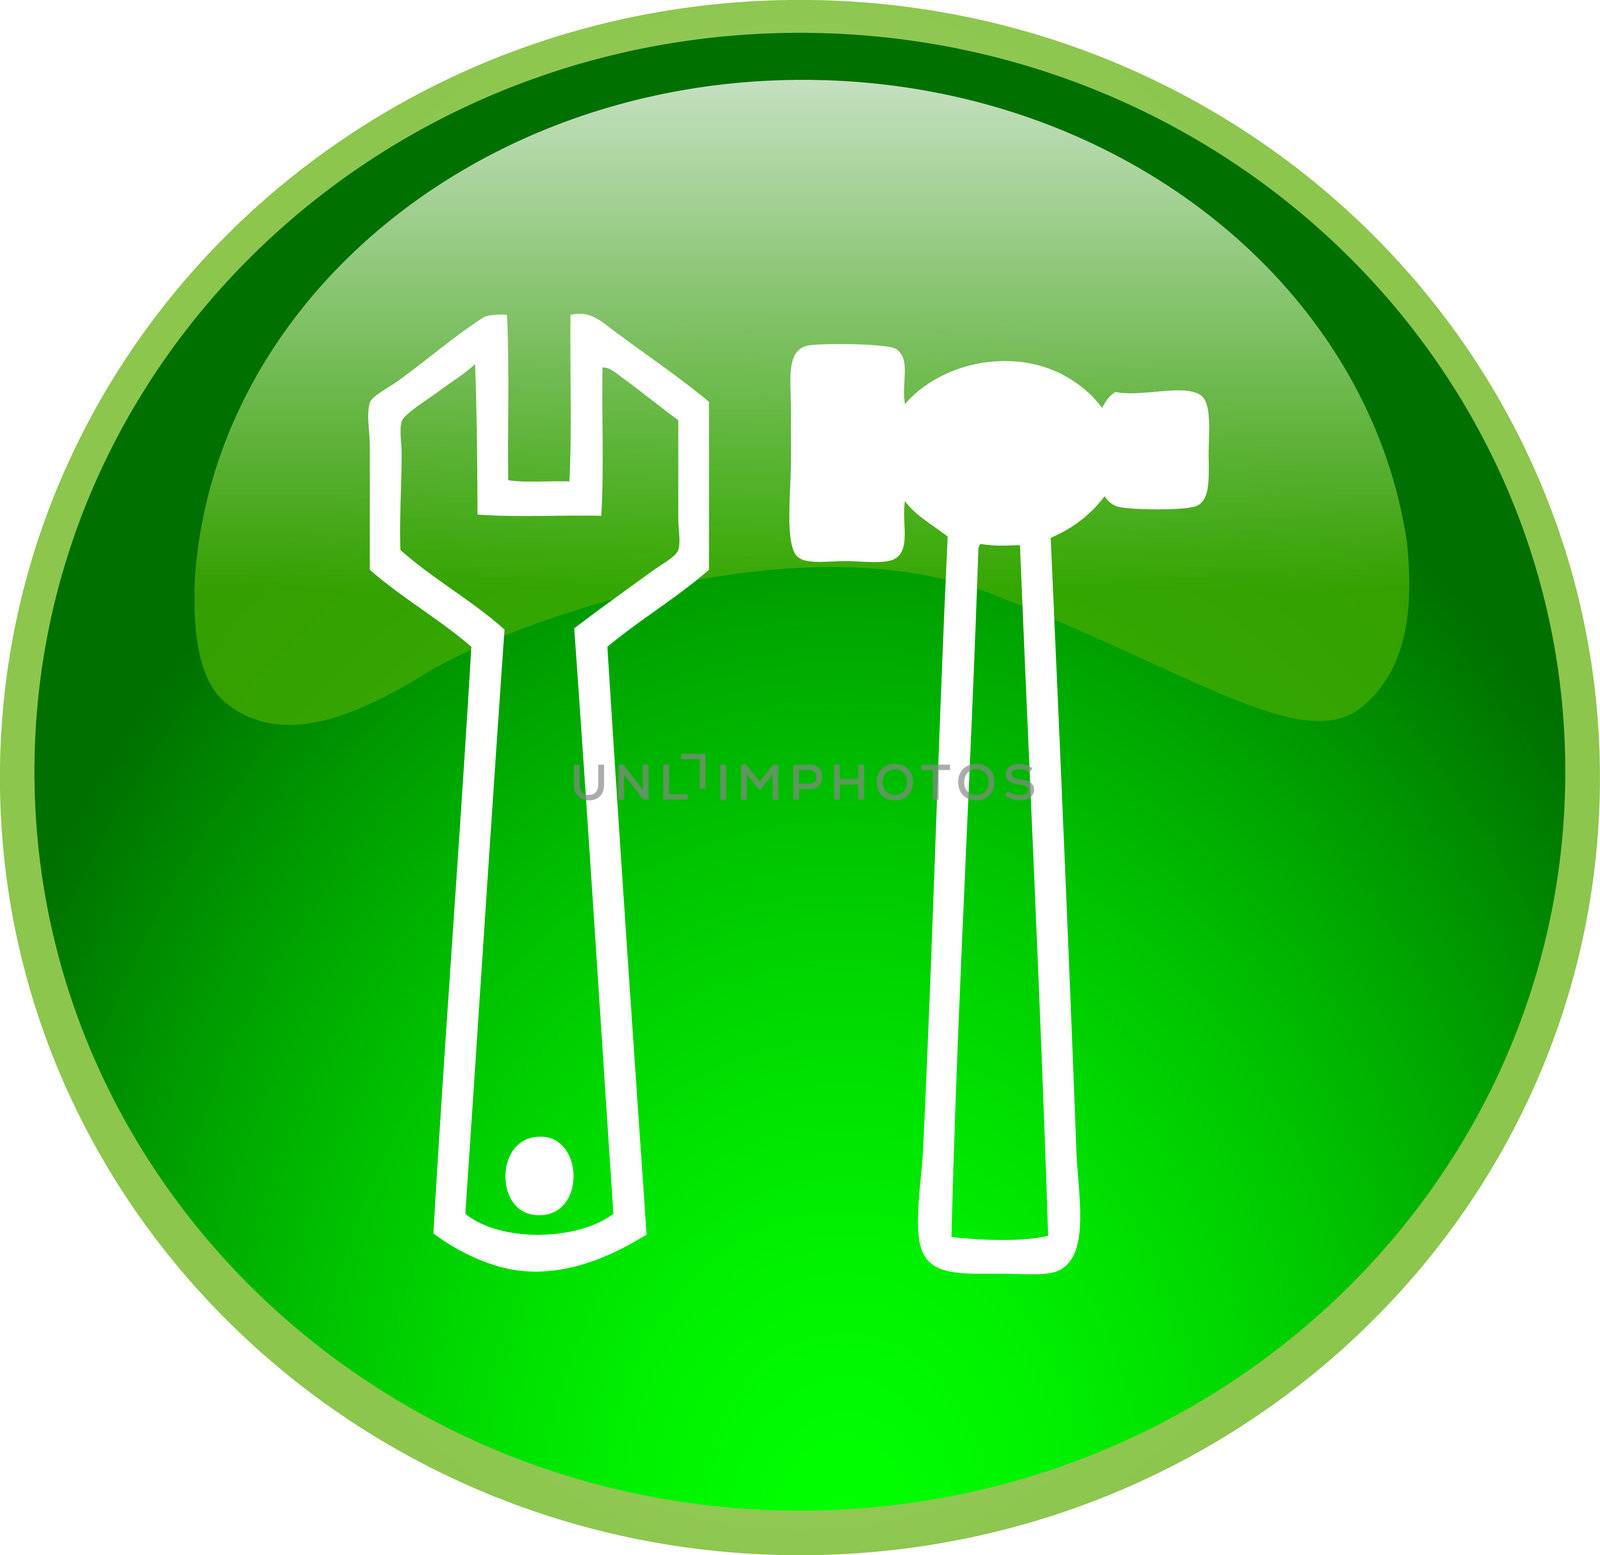 illustration of a green repair button